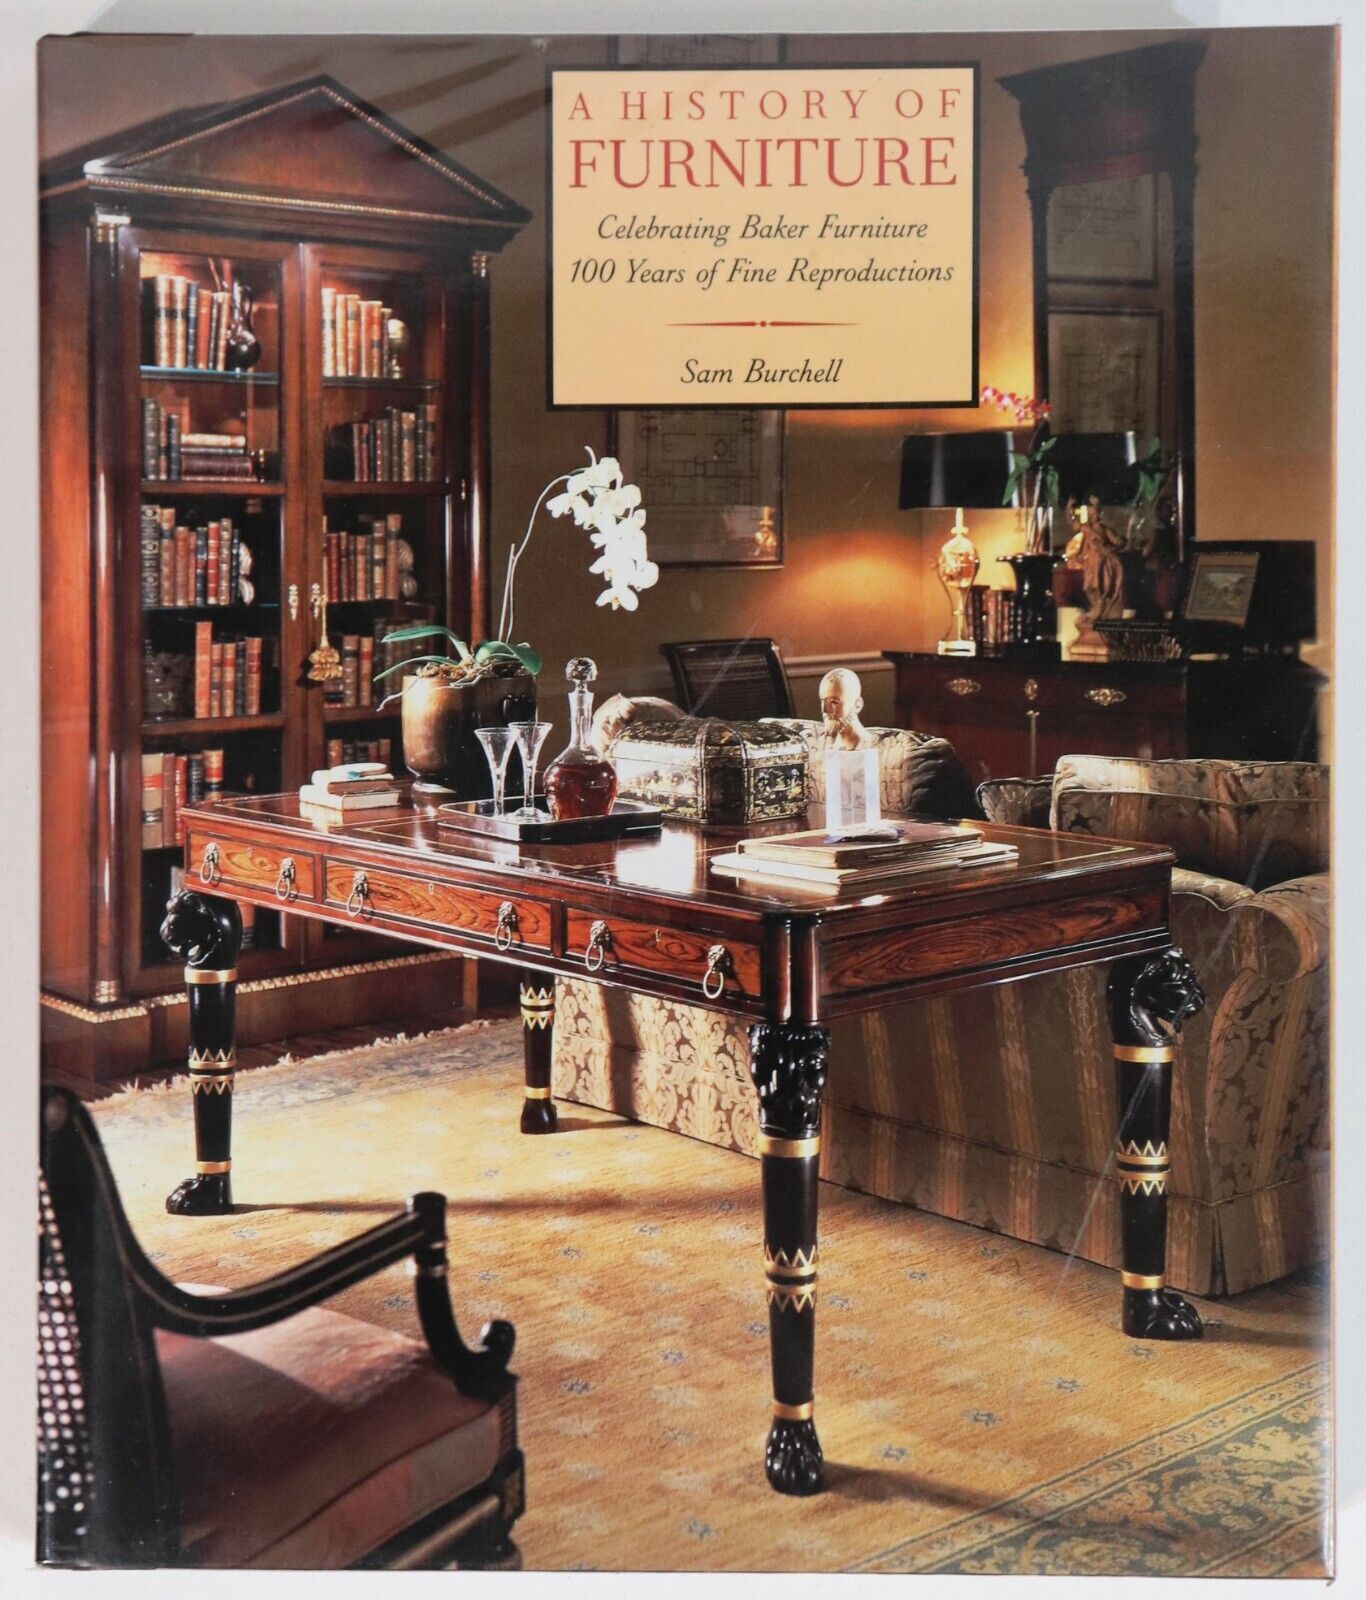 A History Of Furniture by Sam Burchell - 1991 - Baker Furniture Reference Book